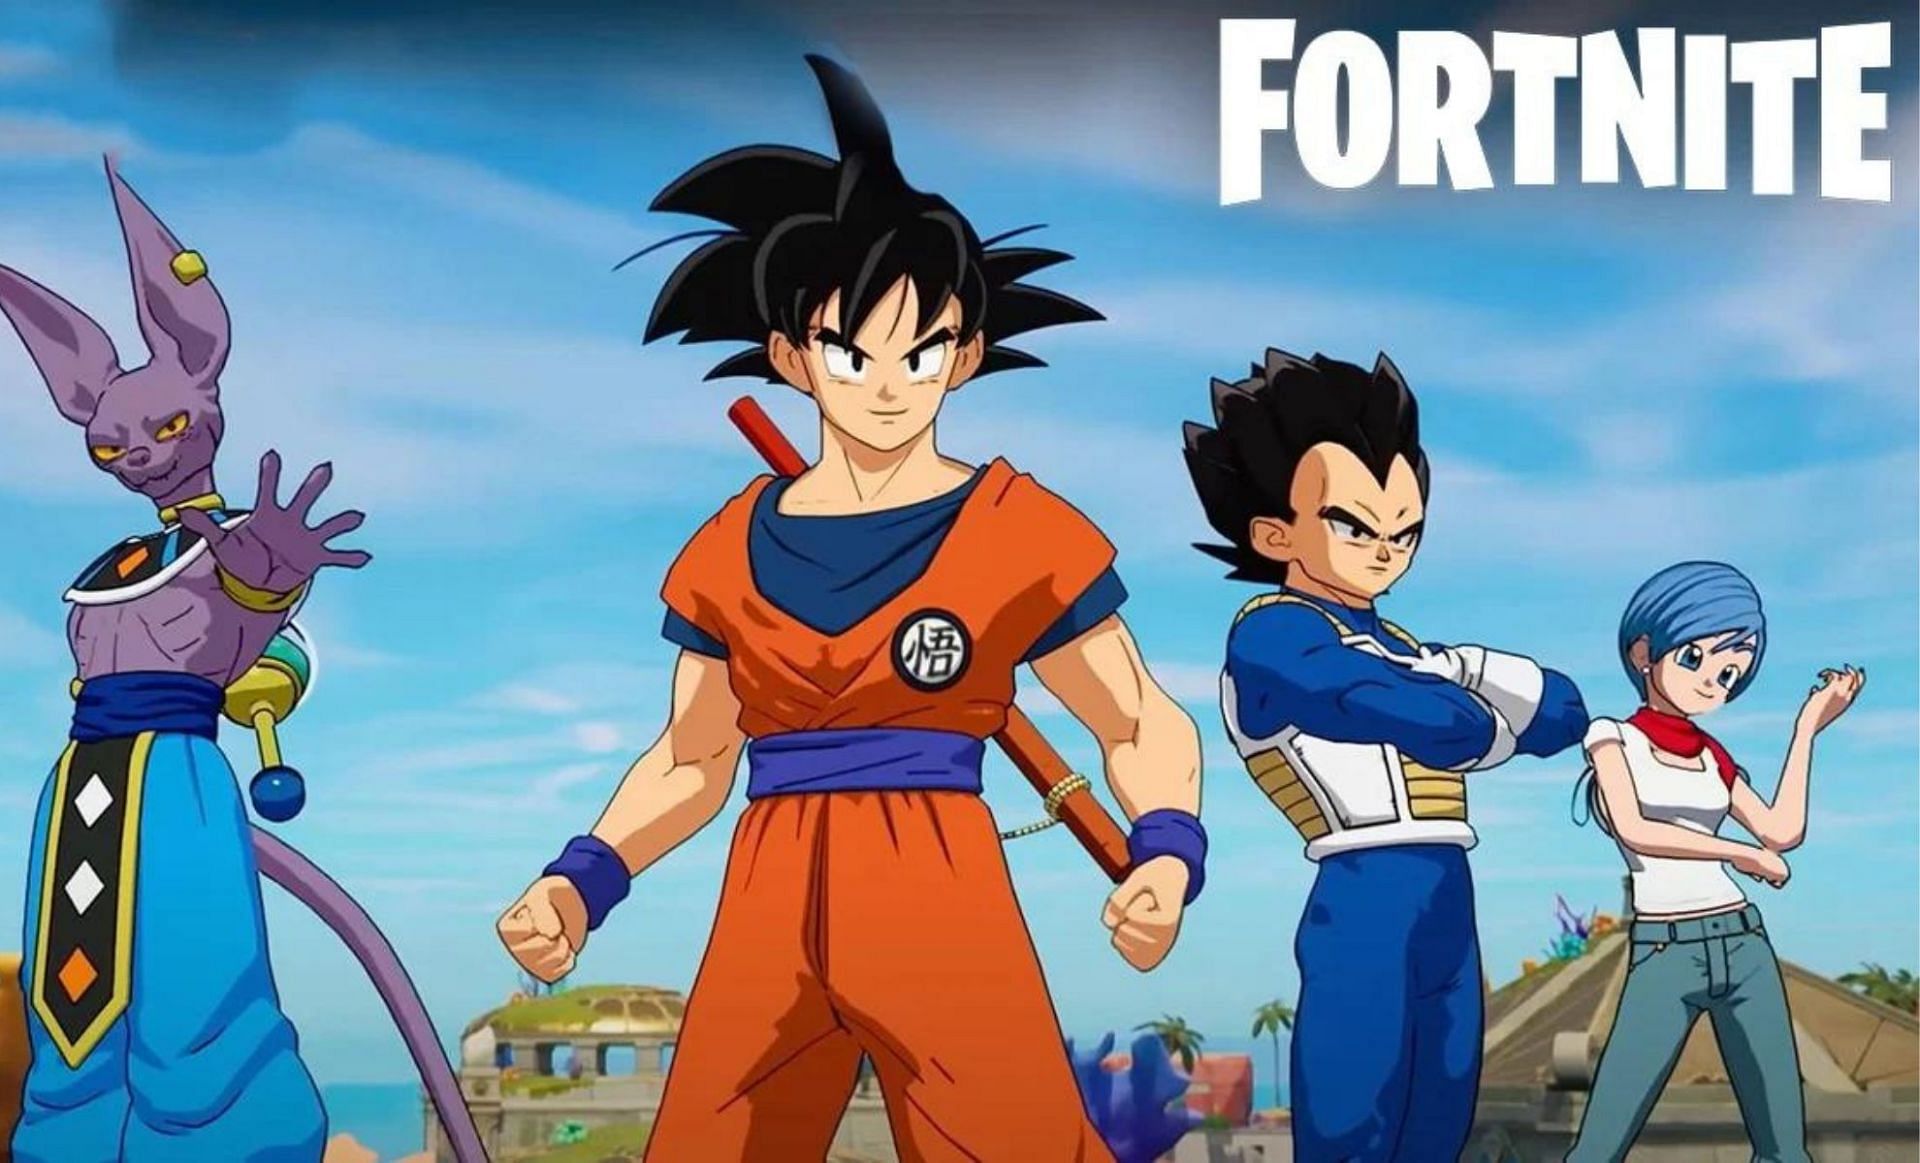 Dragon Ball skins in the latest crossover (Image via Epic Games)